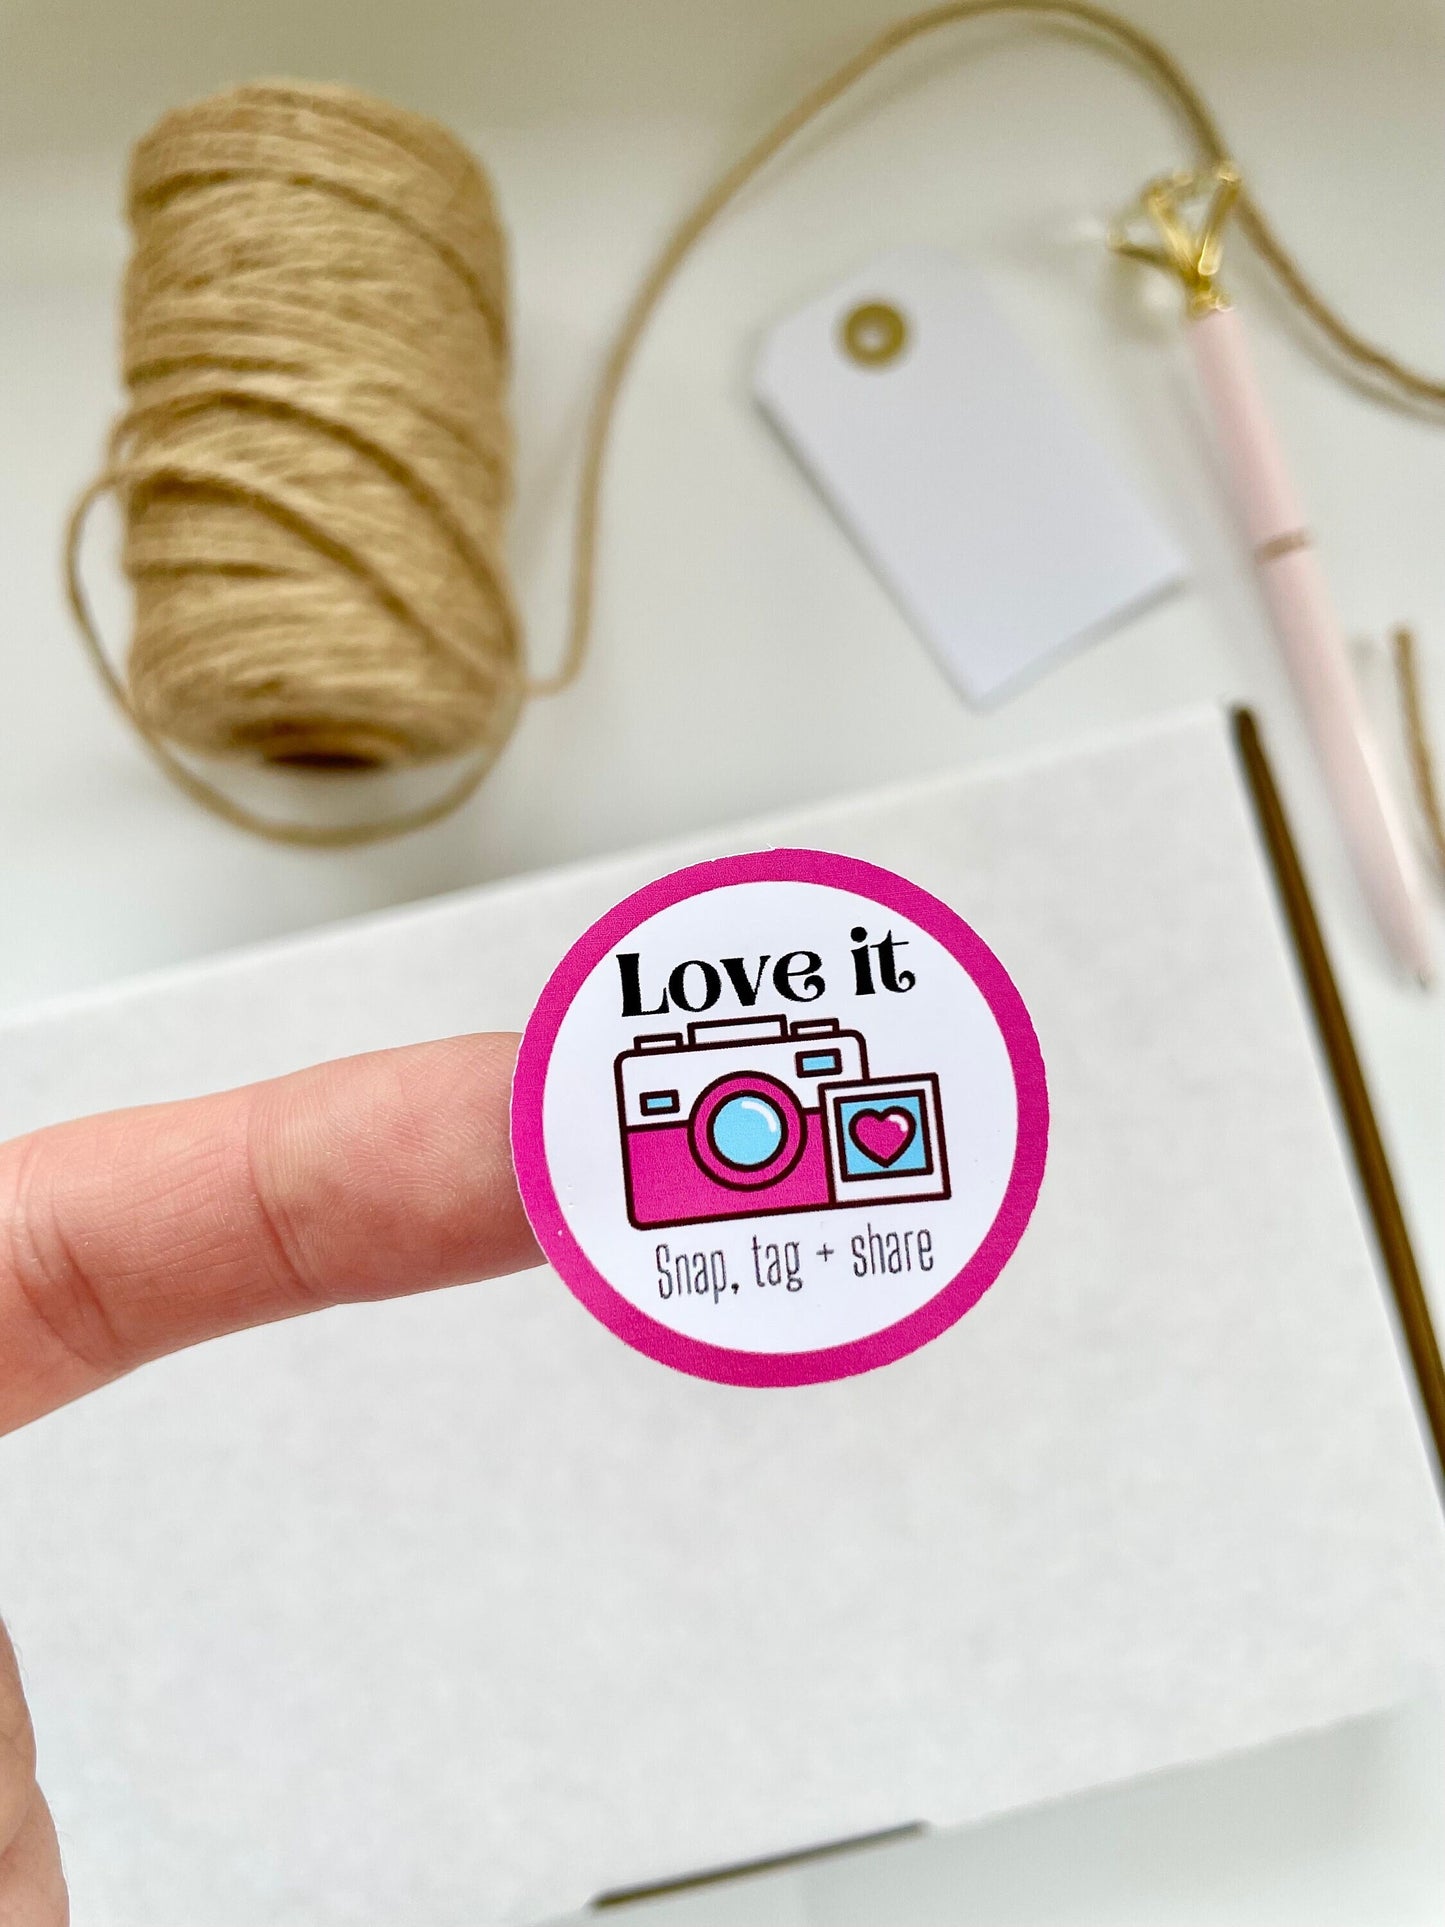 Love It Snap Tag Share Social Media Stickers | Small Business Packaging Labels | Advertising Sticker